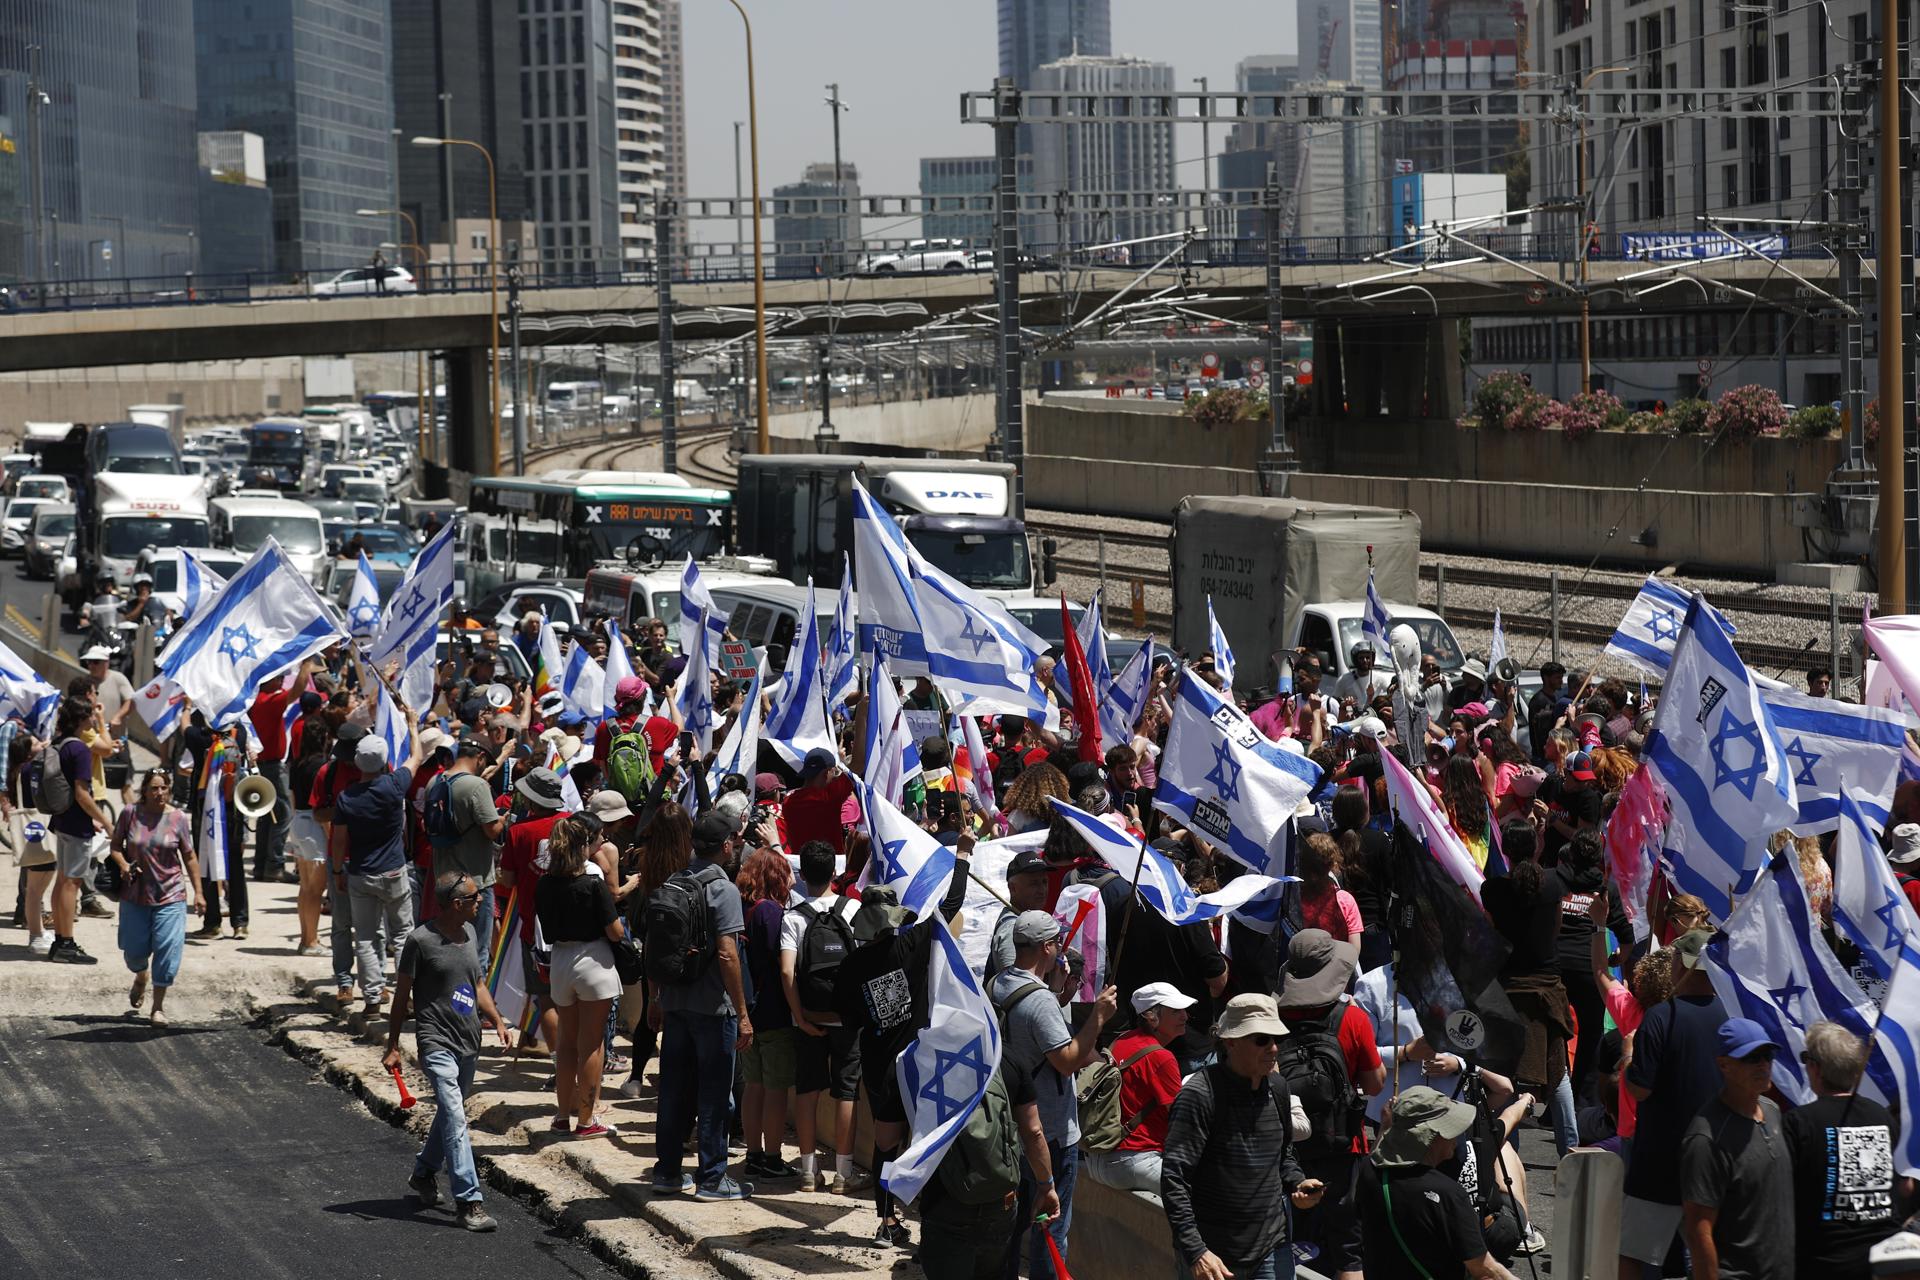 Israelis wave flags during a protest against the justice system reform in Tel Aviv, Israel, 04 May 2023. EFE/EPA/ATEF SAFADI